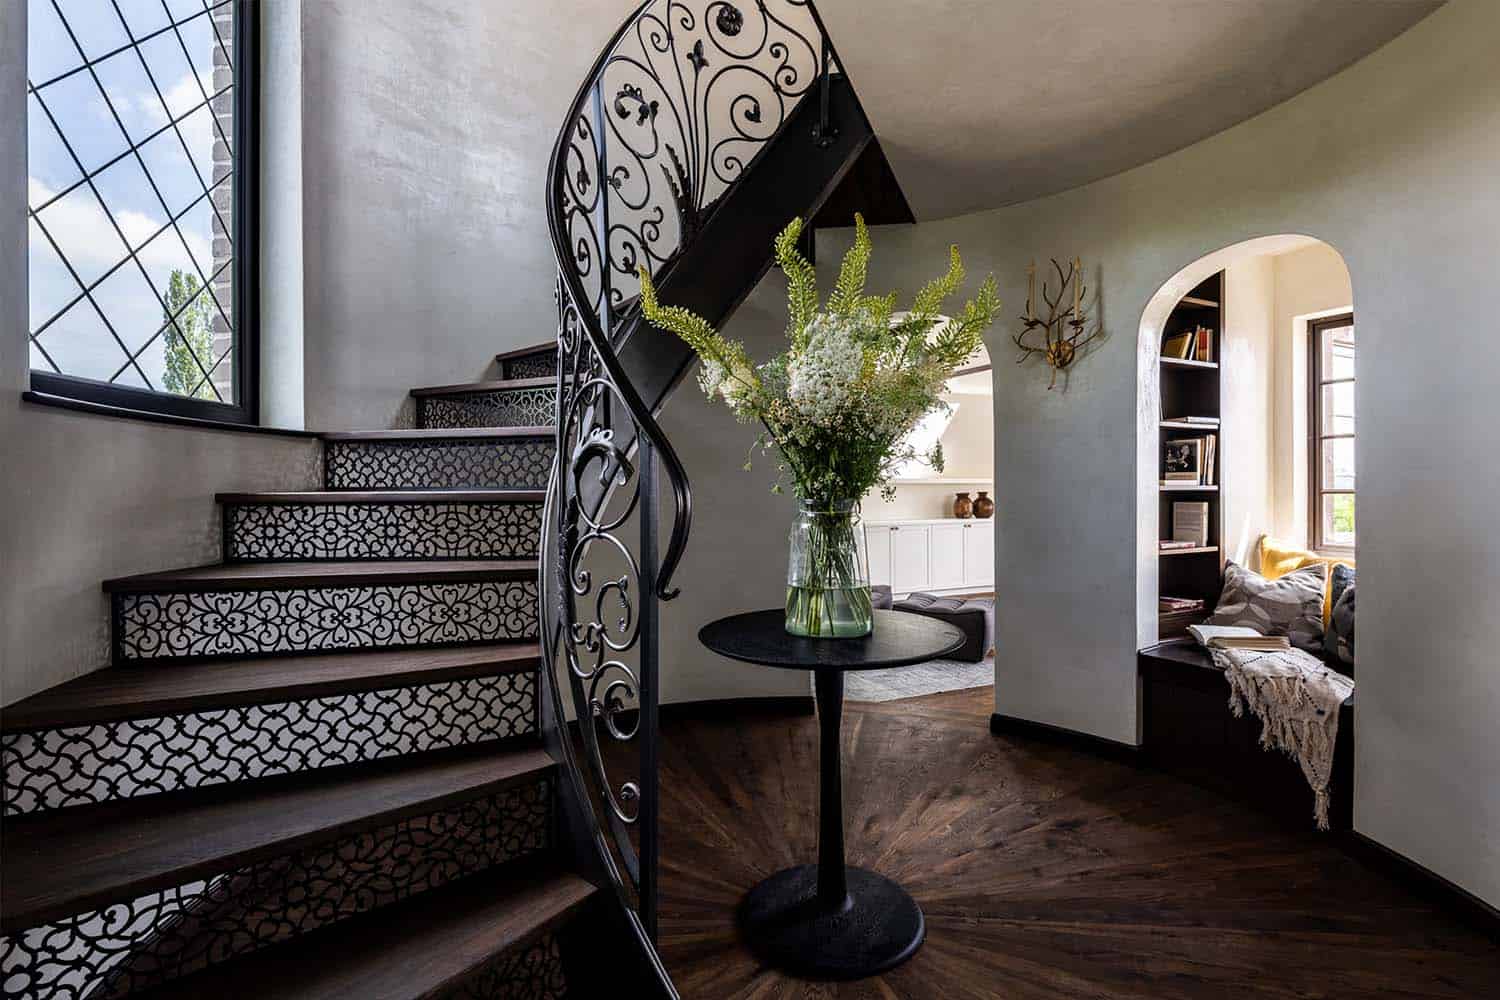 Tudor style staircase and a built-in window reading nook